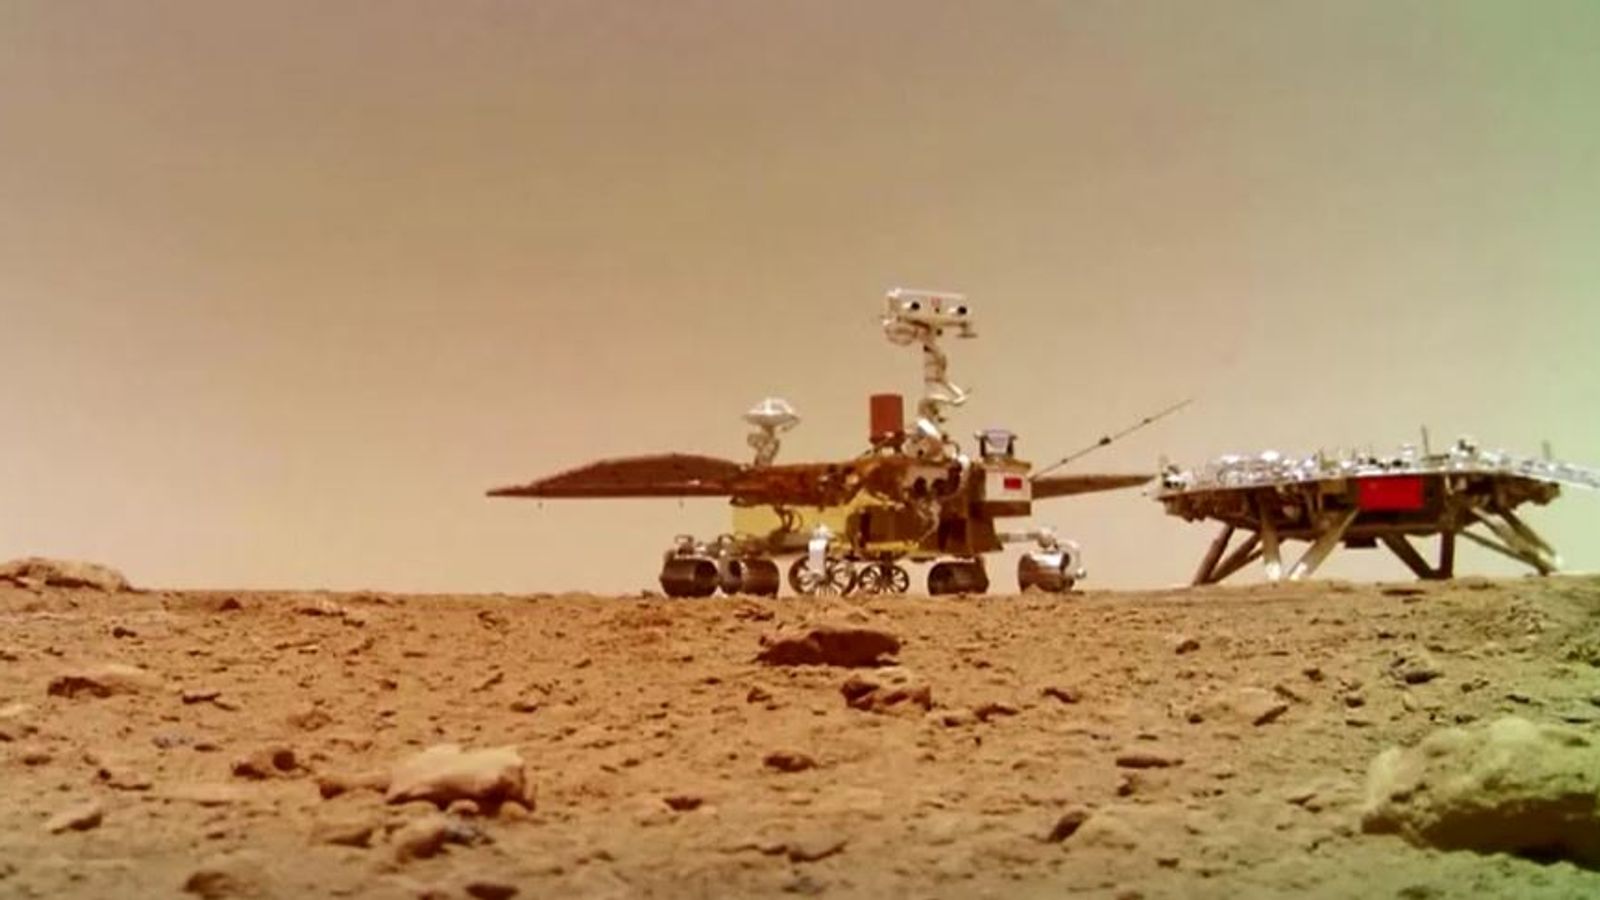 The China National Space Administration (CNSA) released a series of audio files that were the first recorded by the country's Mars rover Zhurong. The 